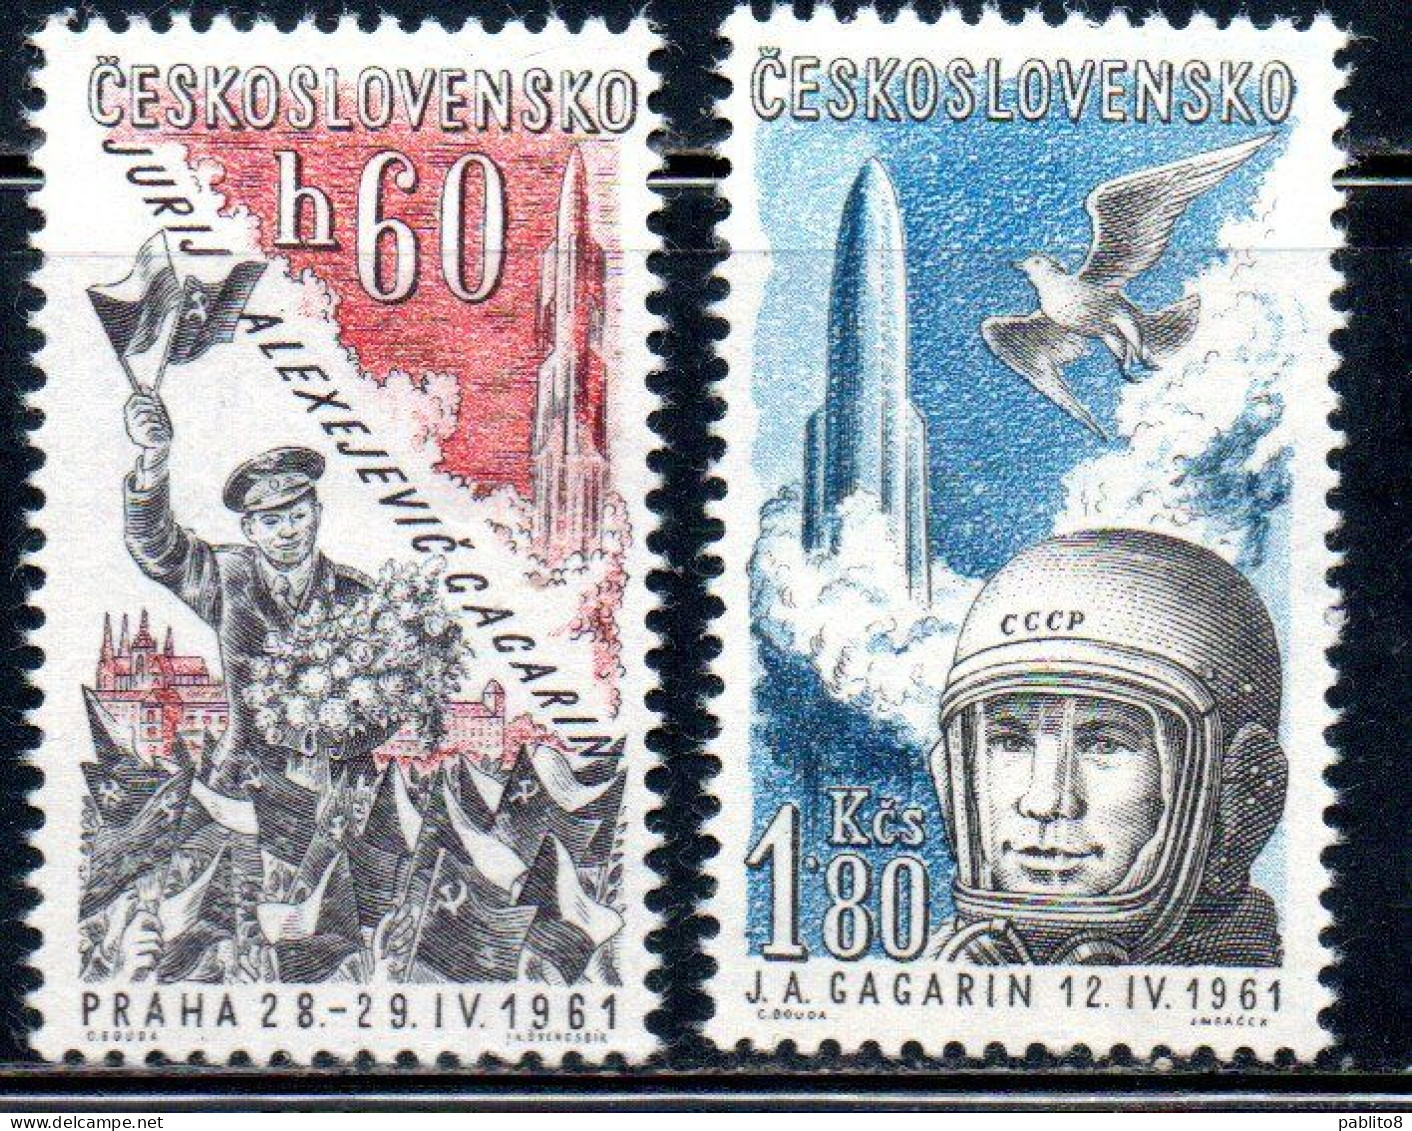 CZECHOSLOVAKIA CECOSLOVACCHIA 1961 AIR POST MAIL AIRMAIL COMMEMORATES MAY GAGARIN' VISIT COMPLETE SET SERIE COMPLETA MNH - Luchtpost